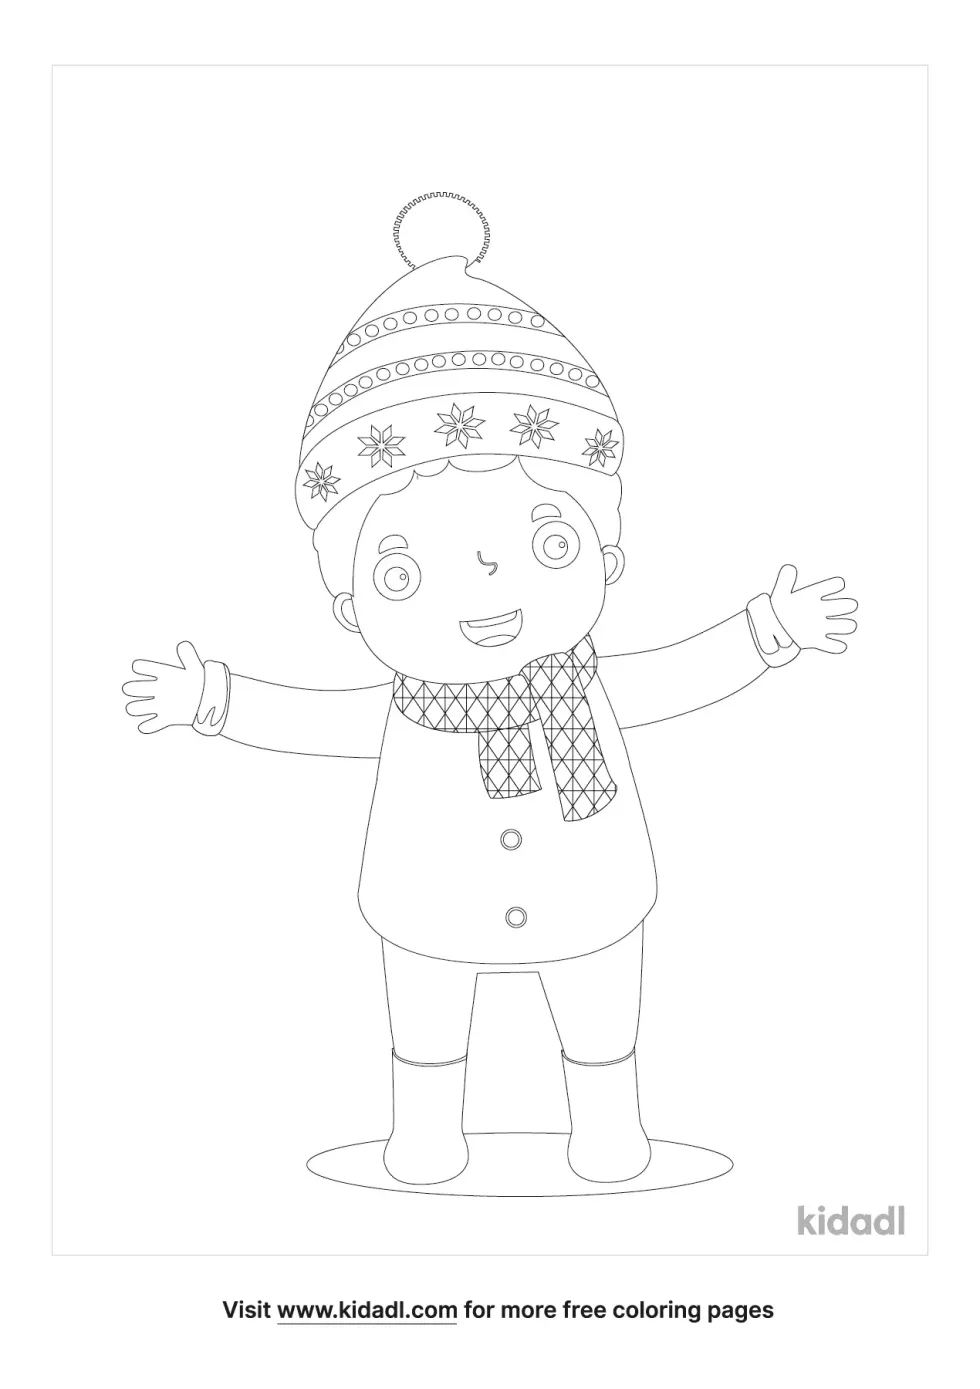 Boy In Snow Cap And Scarf